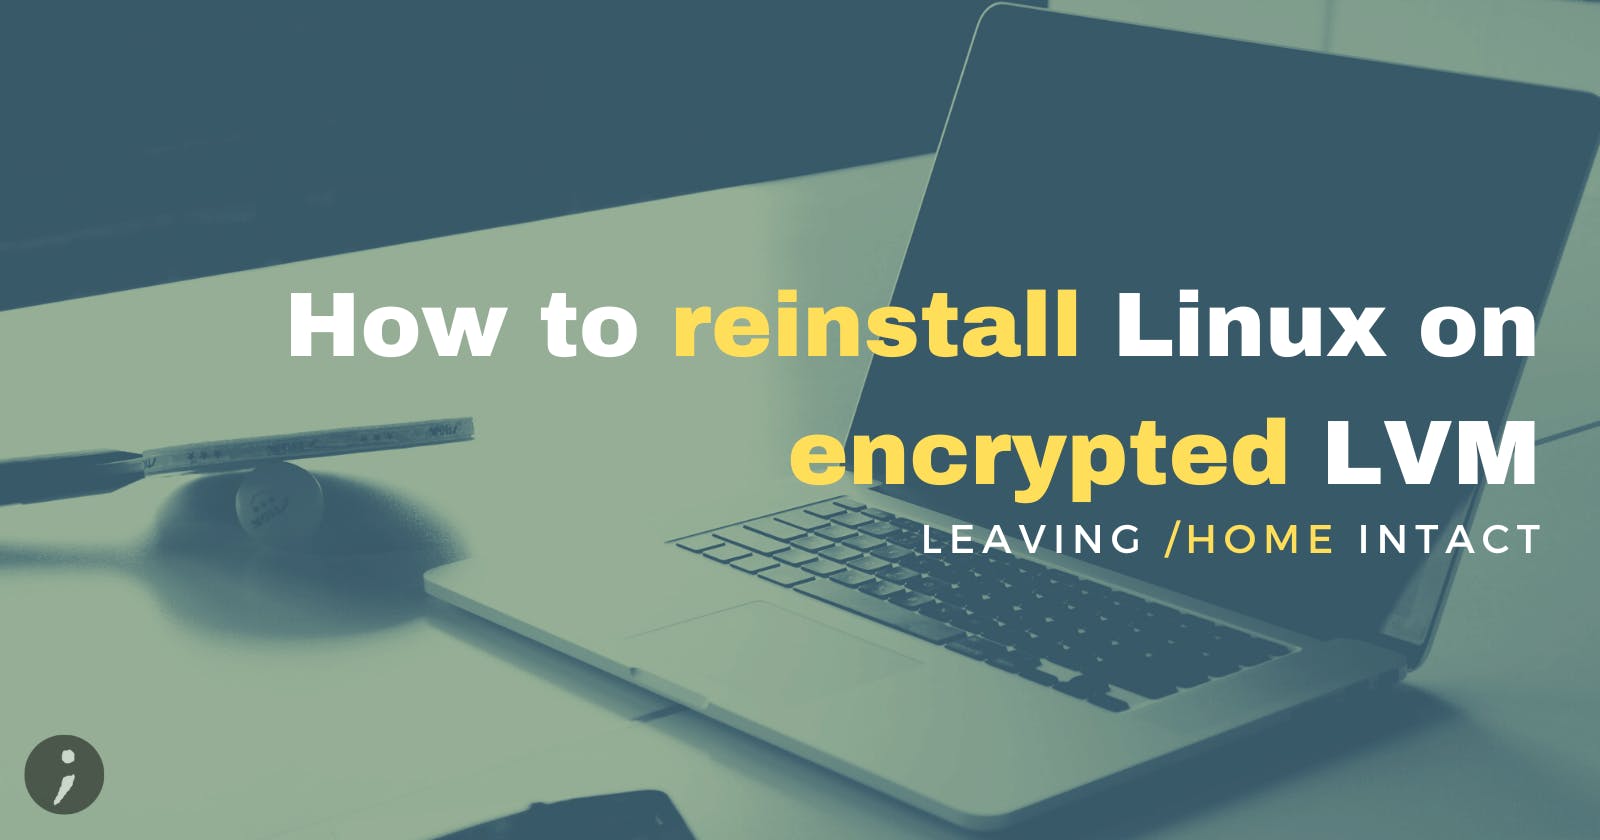 How to reinstall Linux on encrypted LVM